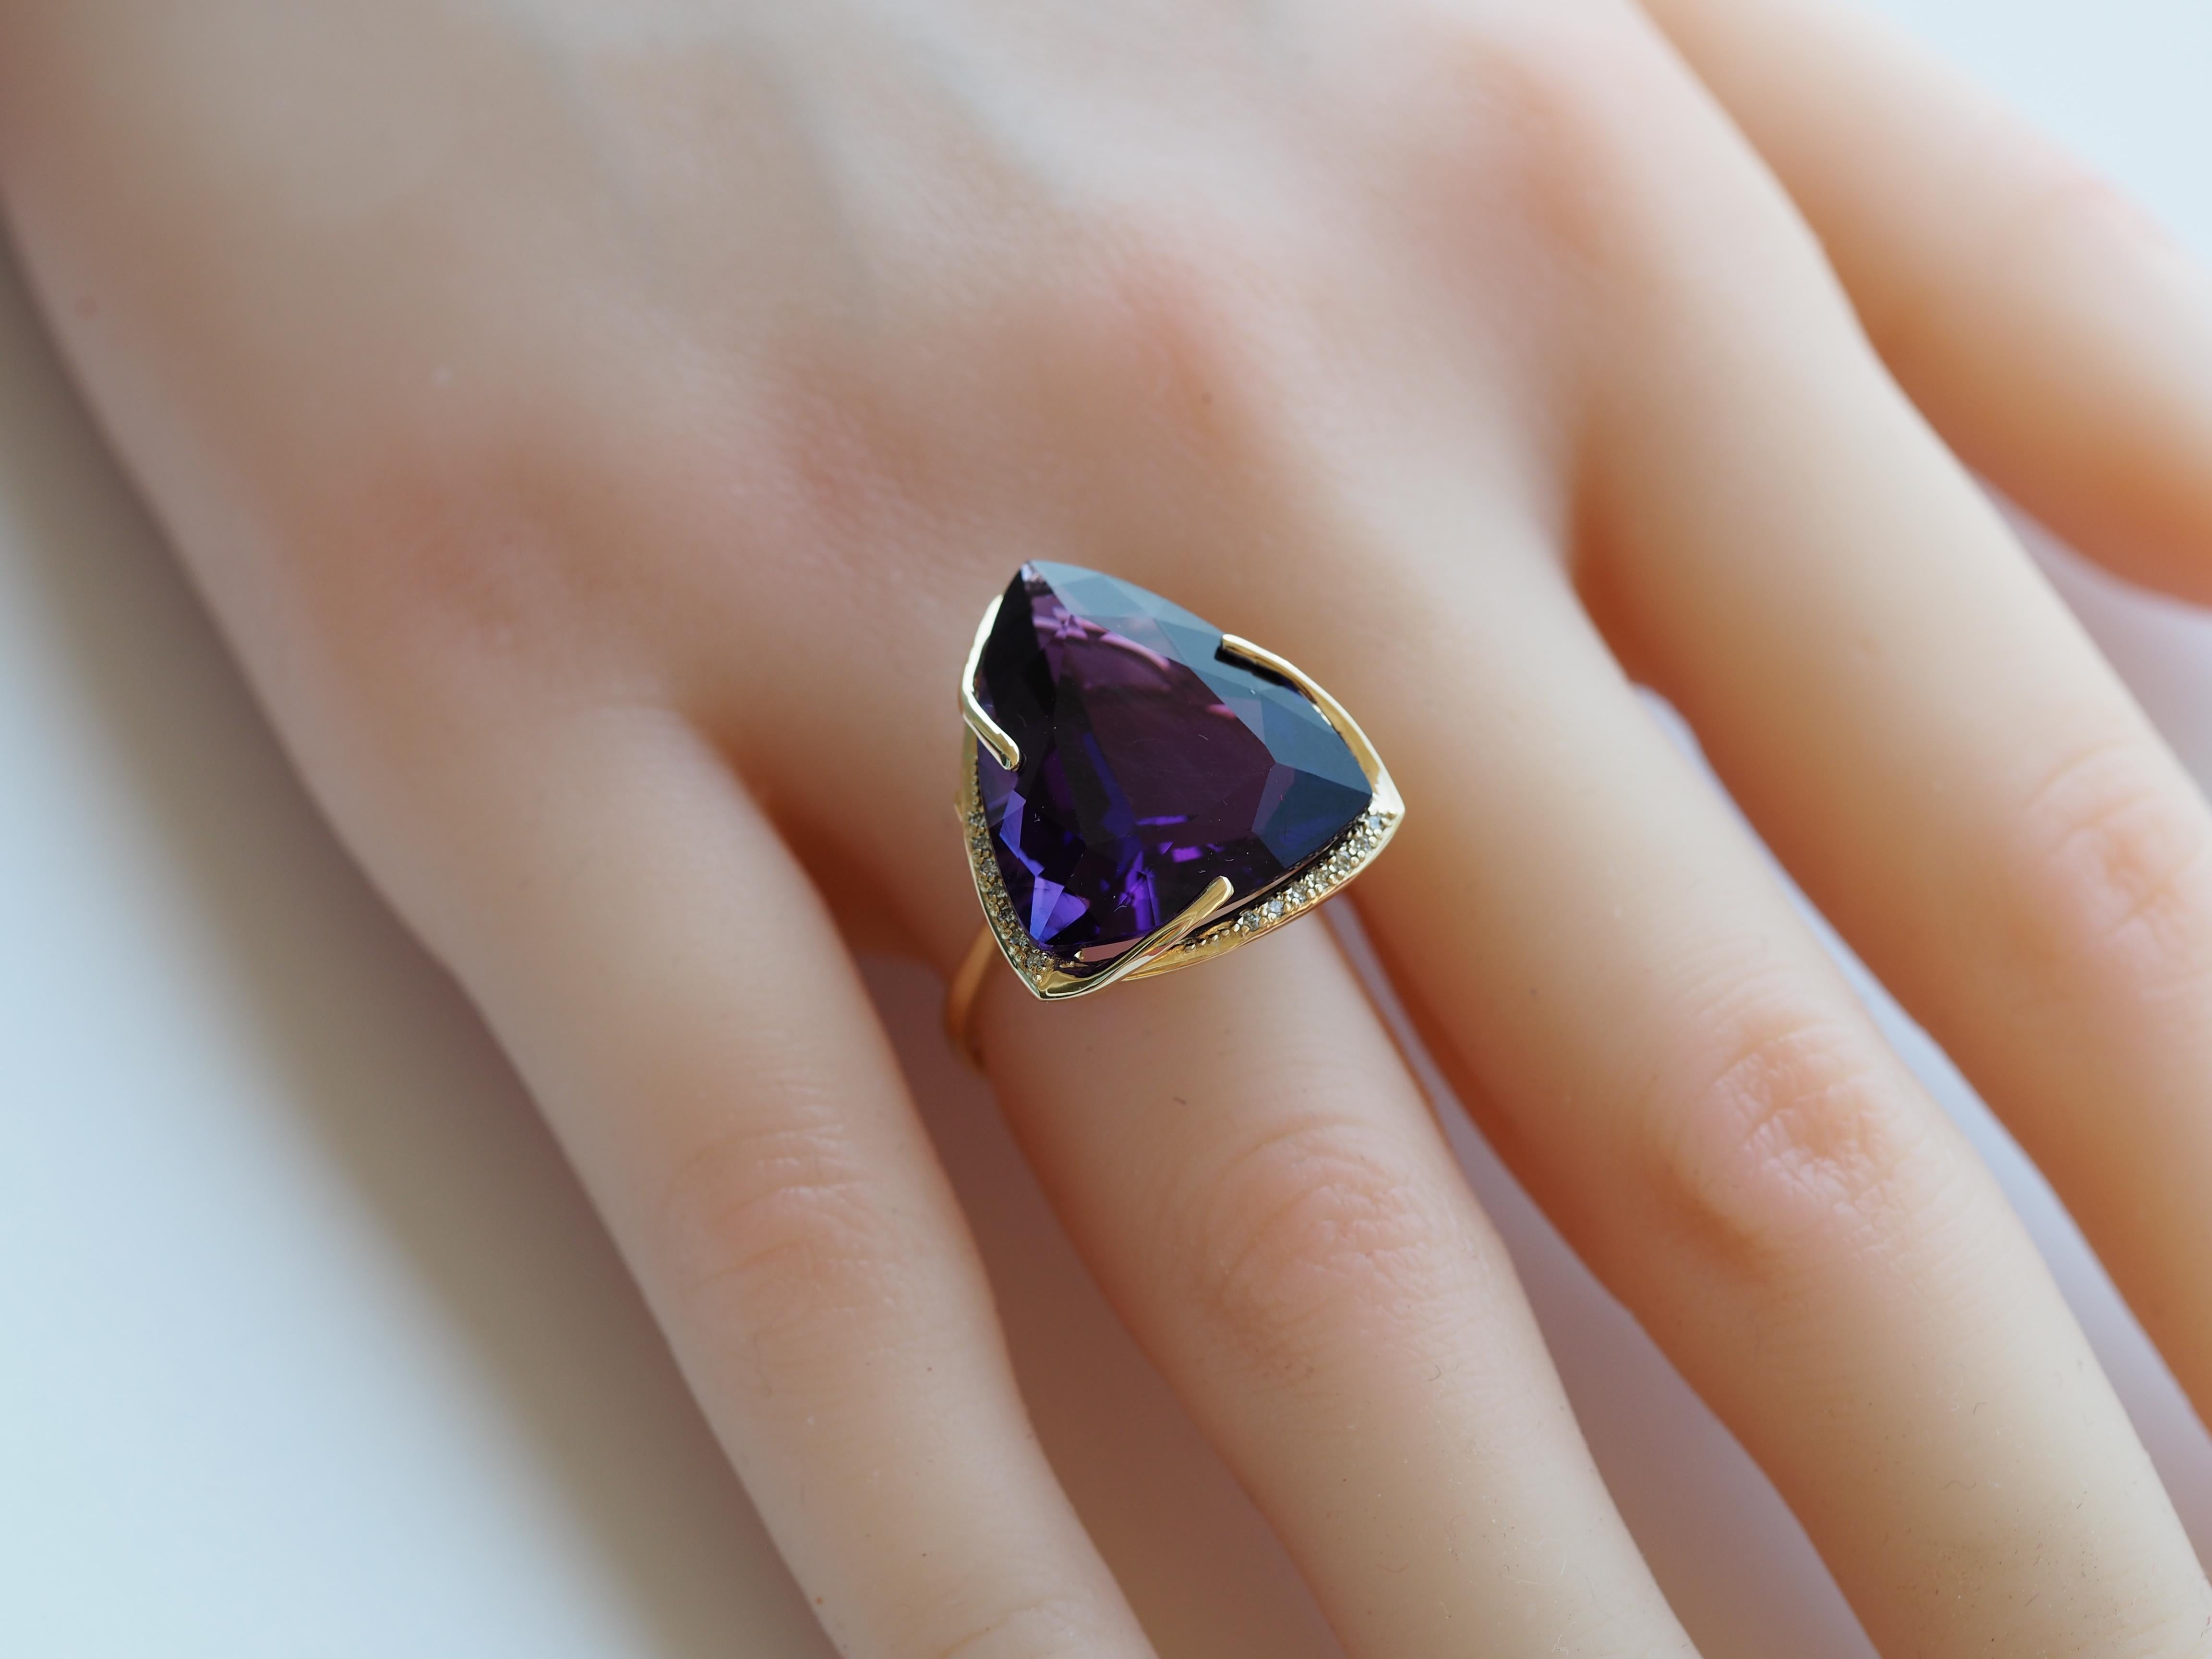 14 Karat Gold Ring with Amethyst and Diamonds, Amethyst Cocktail Ring 2